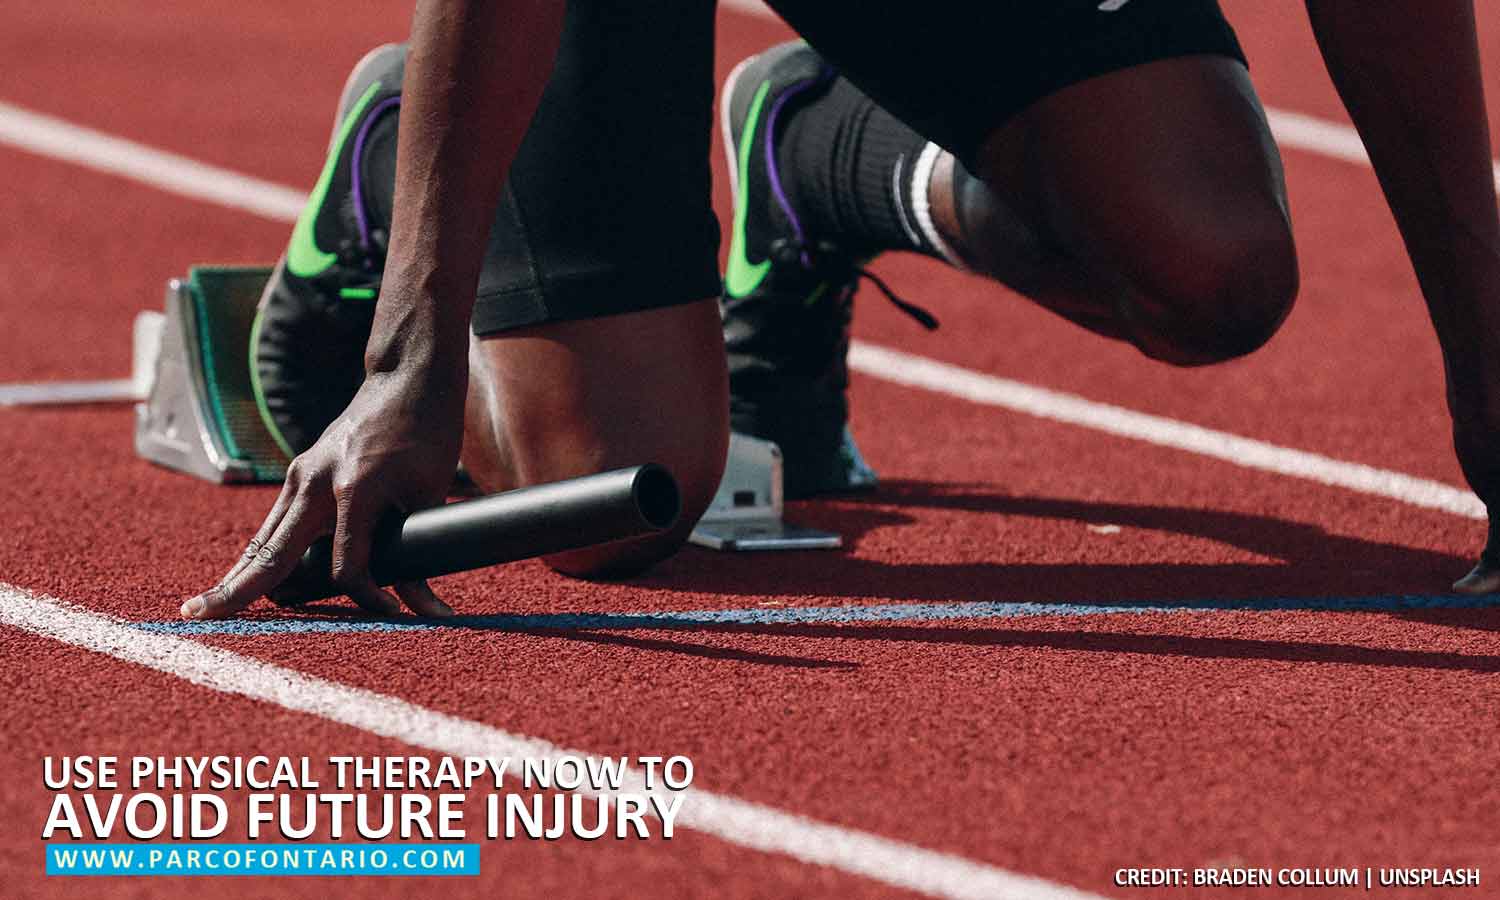 Use physical therapy now to avoid future injury